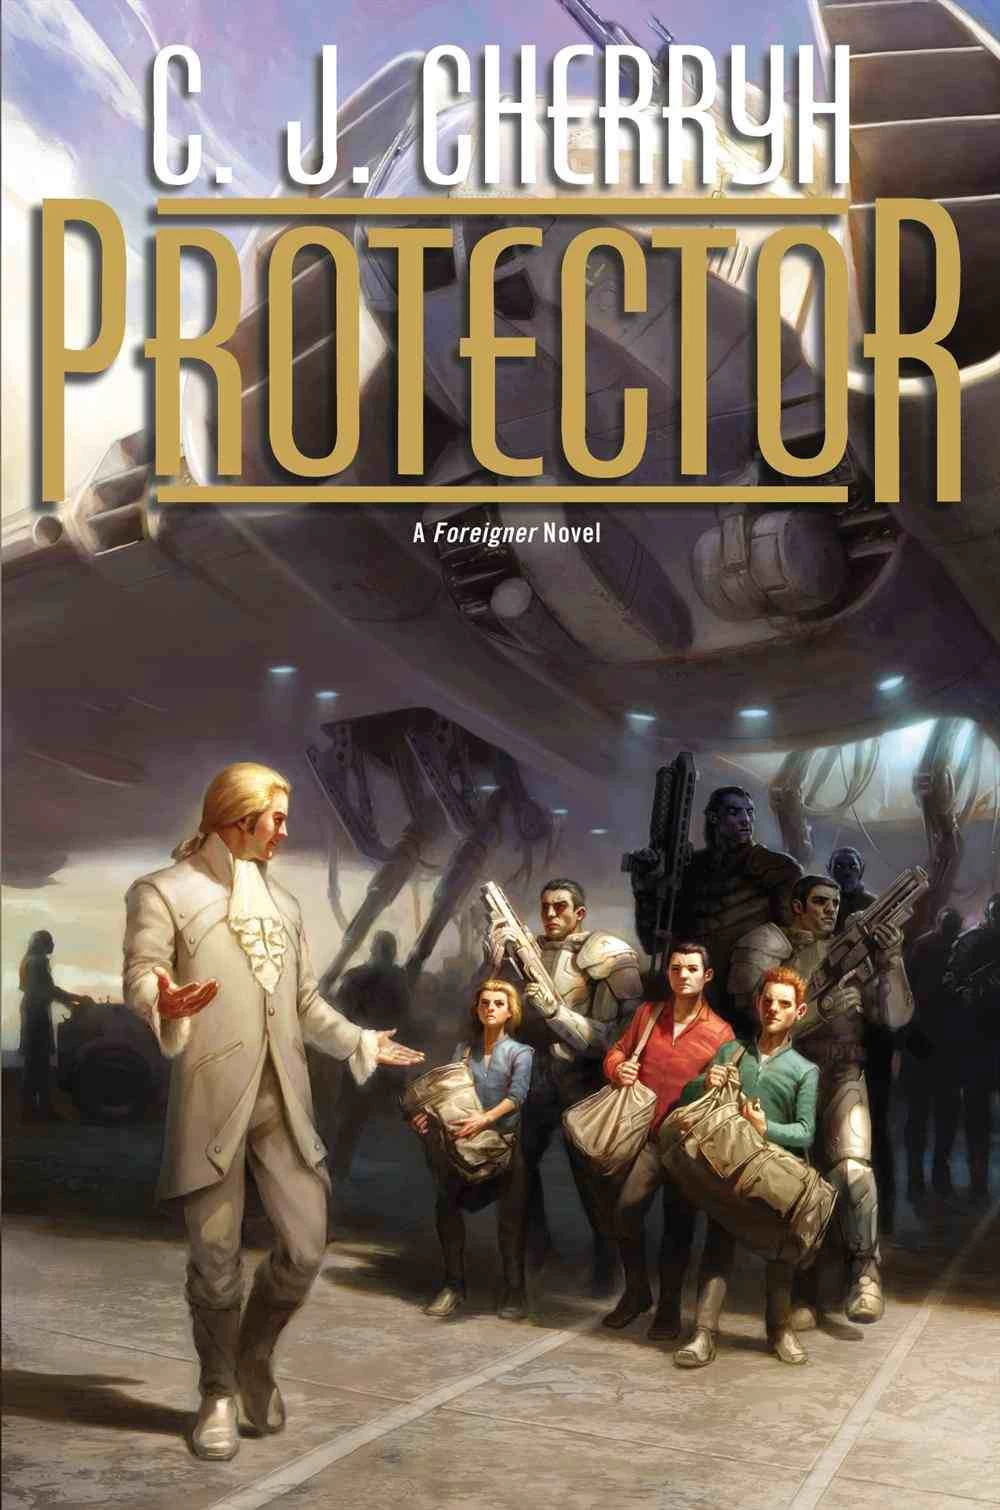 Protector (The Foreigner Universe #14) by C. J. Cherryh